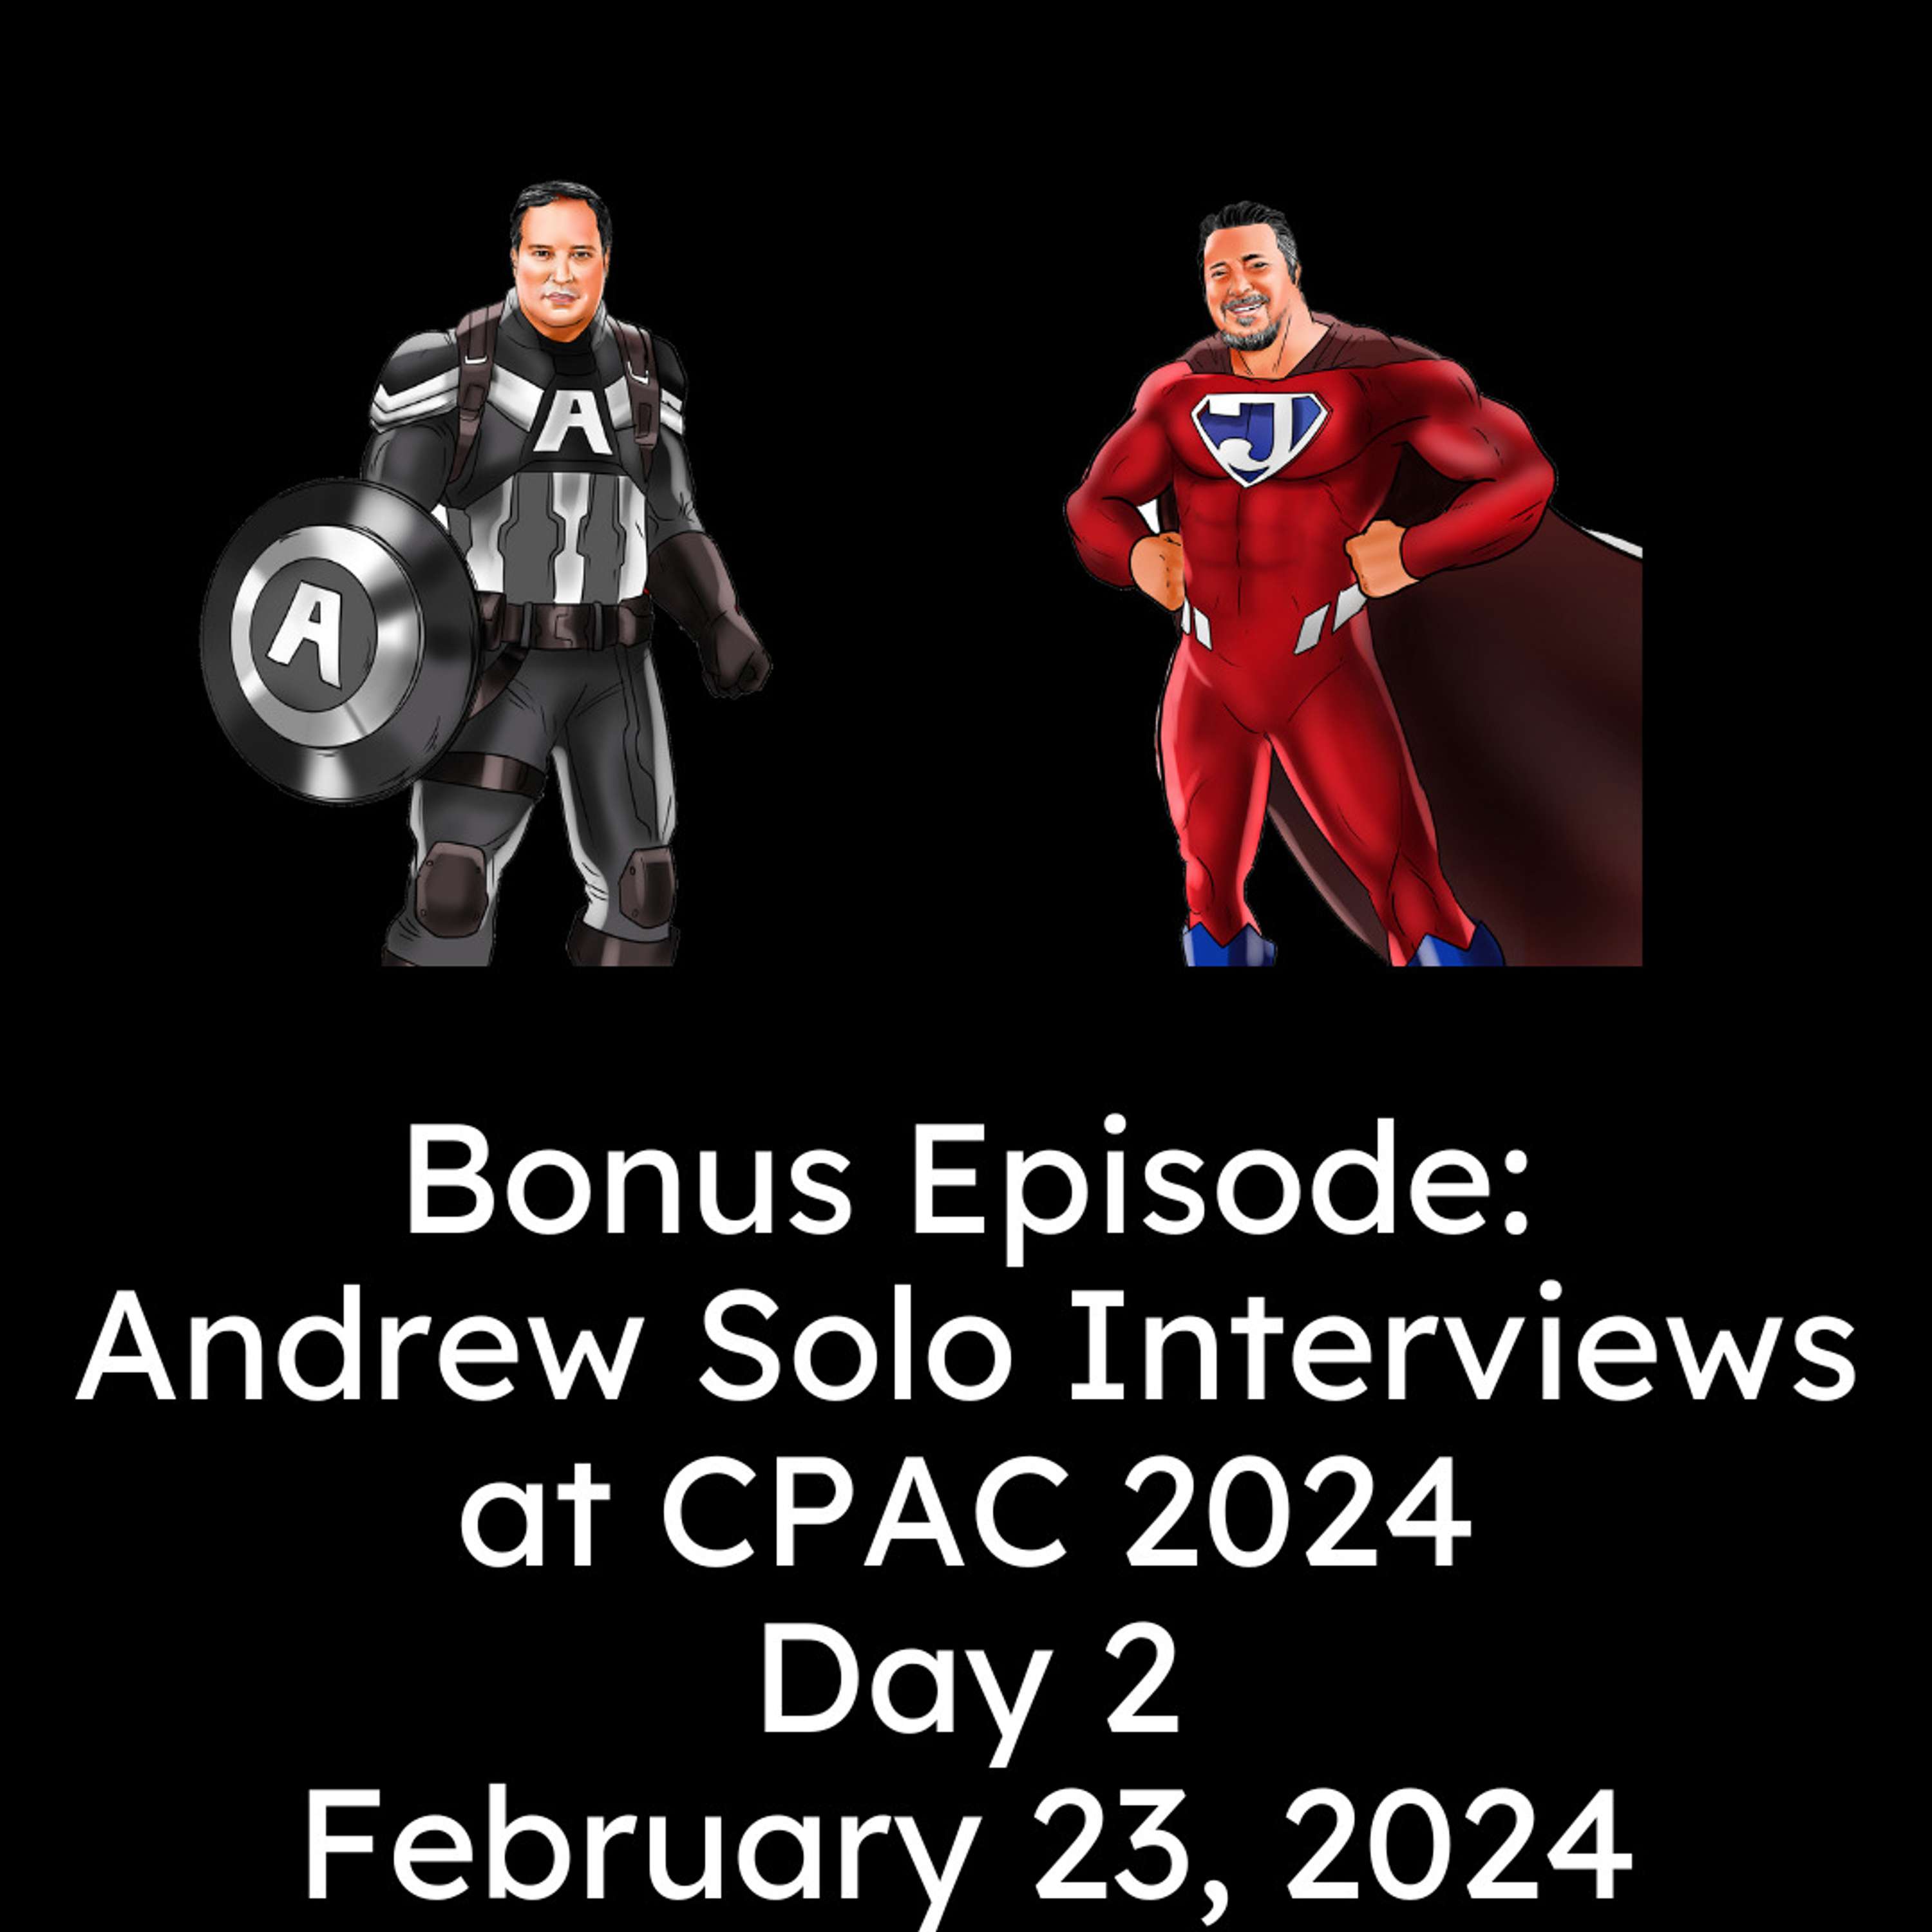 Bonus Episode: Andrew's Solo Interviews at CPAC Day 2!